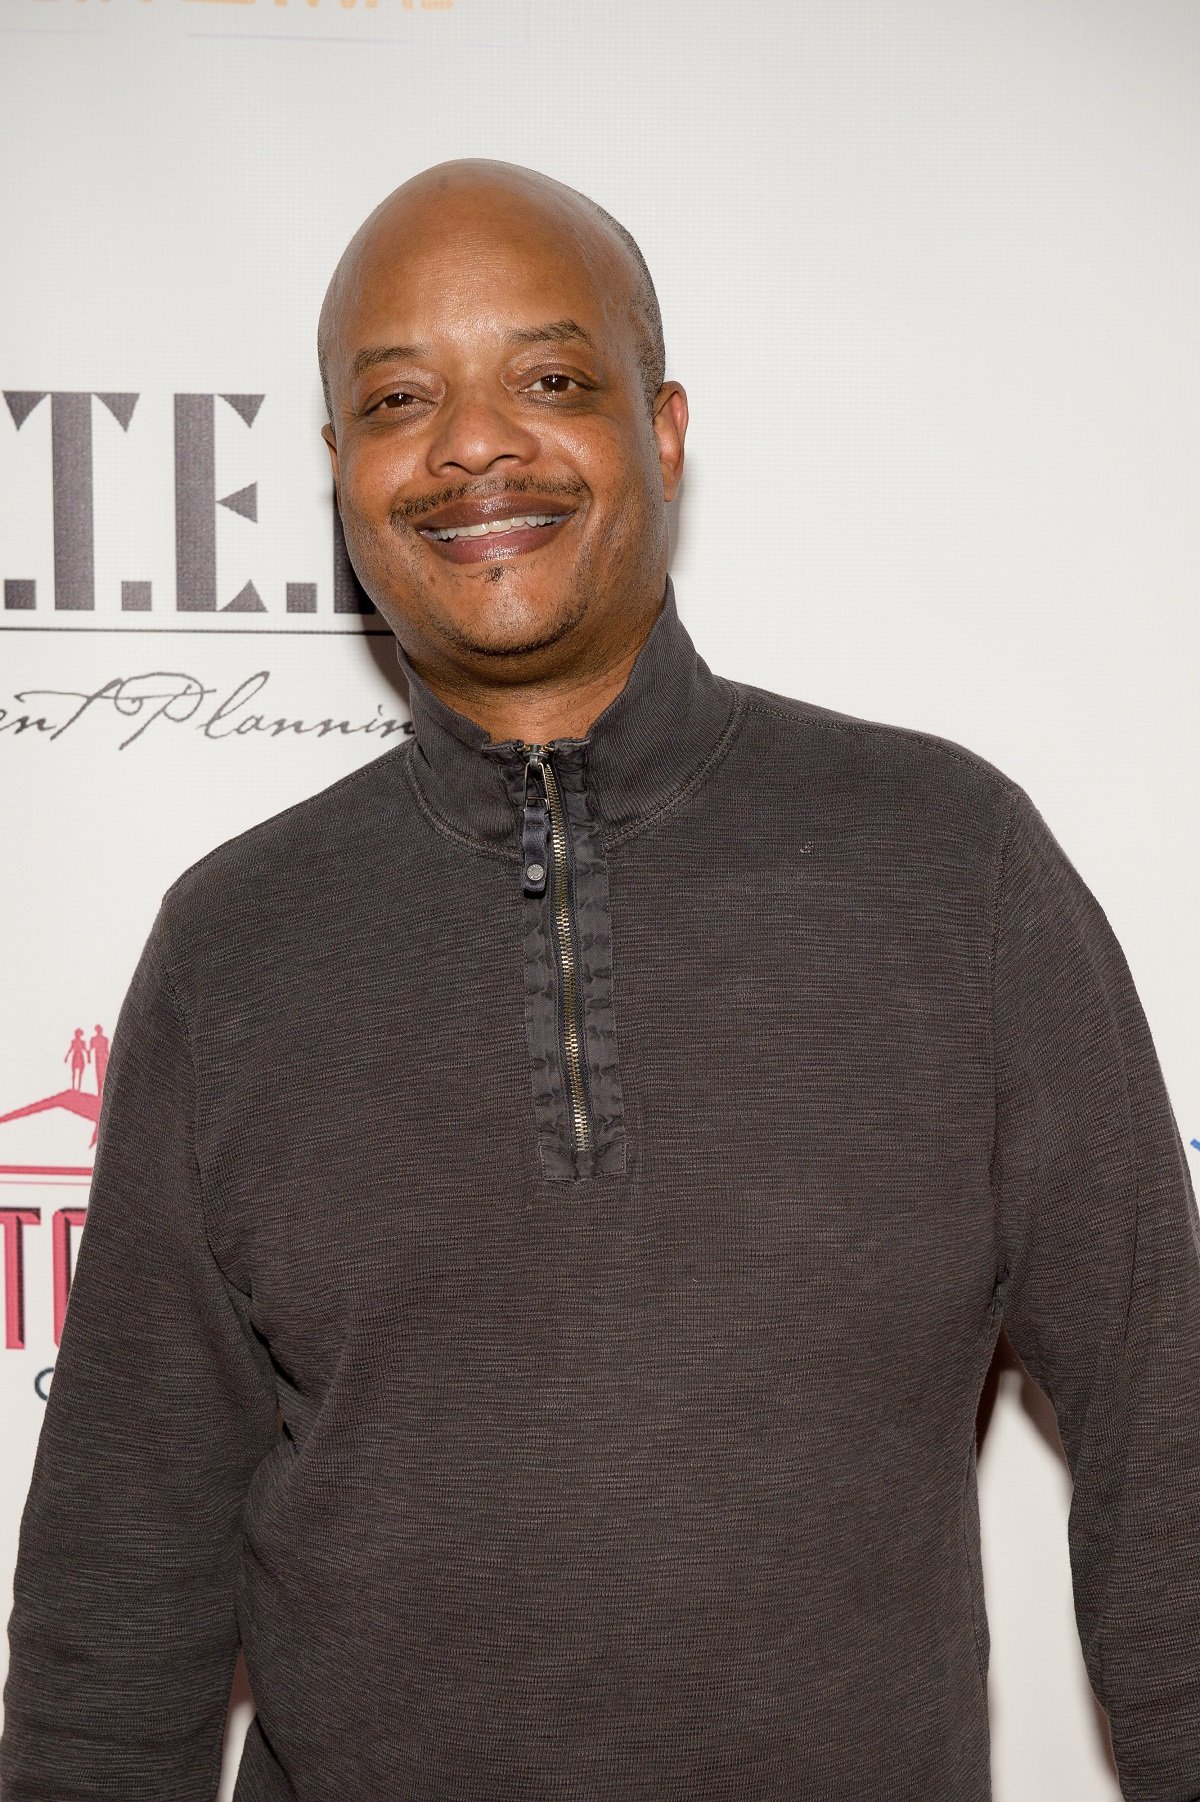 Todd Bridges smiling for photo at the New Birth International Film and Music Festival